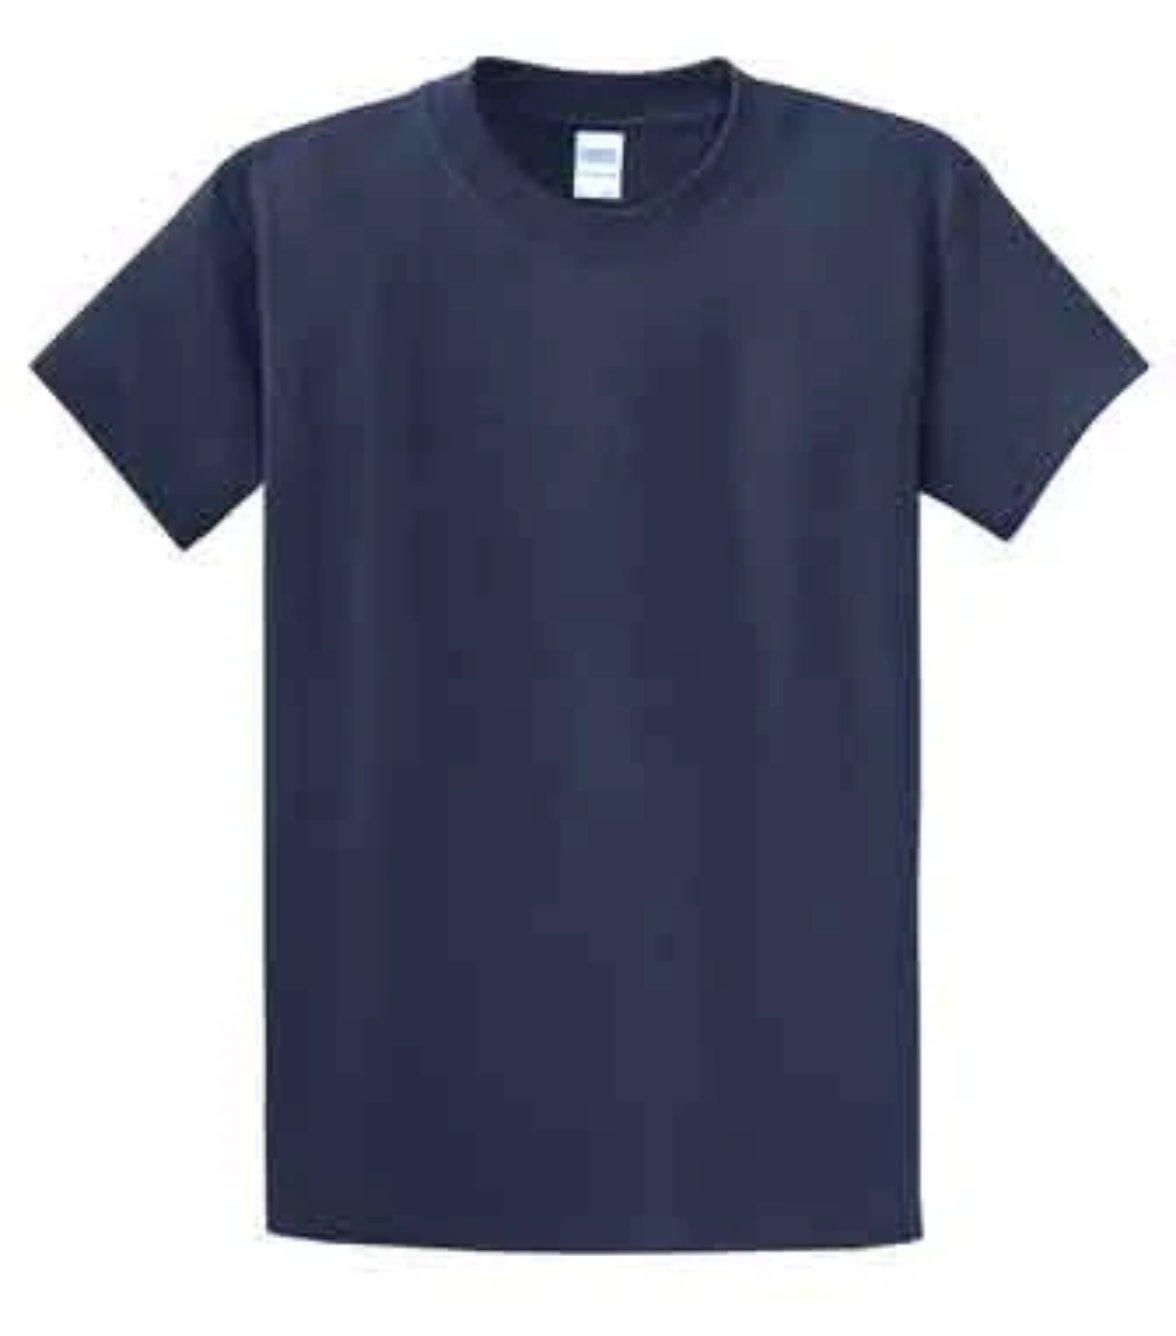 Port & Company 100% Cotton Essential T-Shirt Navy Tall PC61T